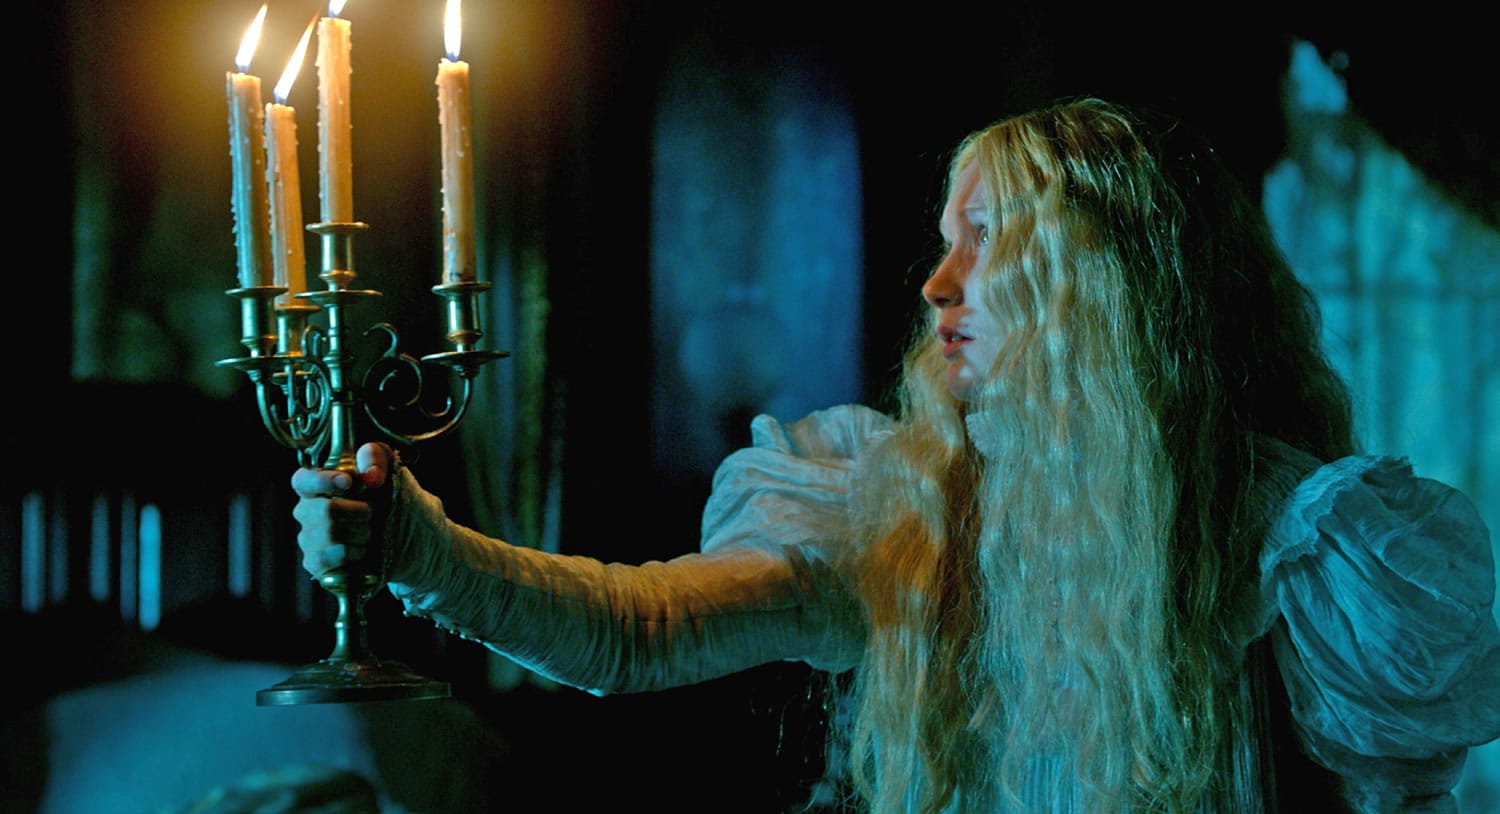 Mia Wasikowska plays Edith Cushing in a scene from "Crimson Peak," a gothic romance from director, Guillermo del Toro.